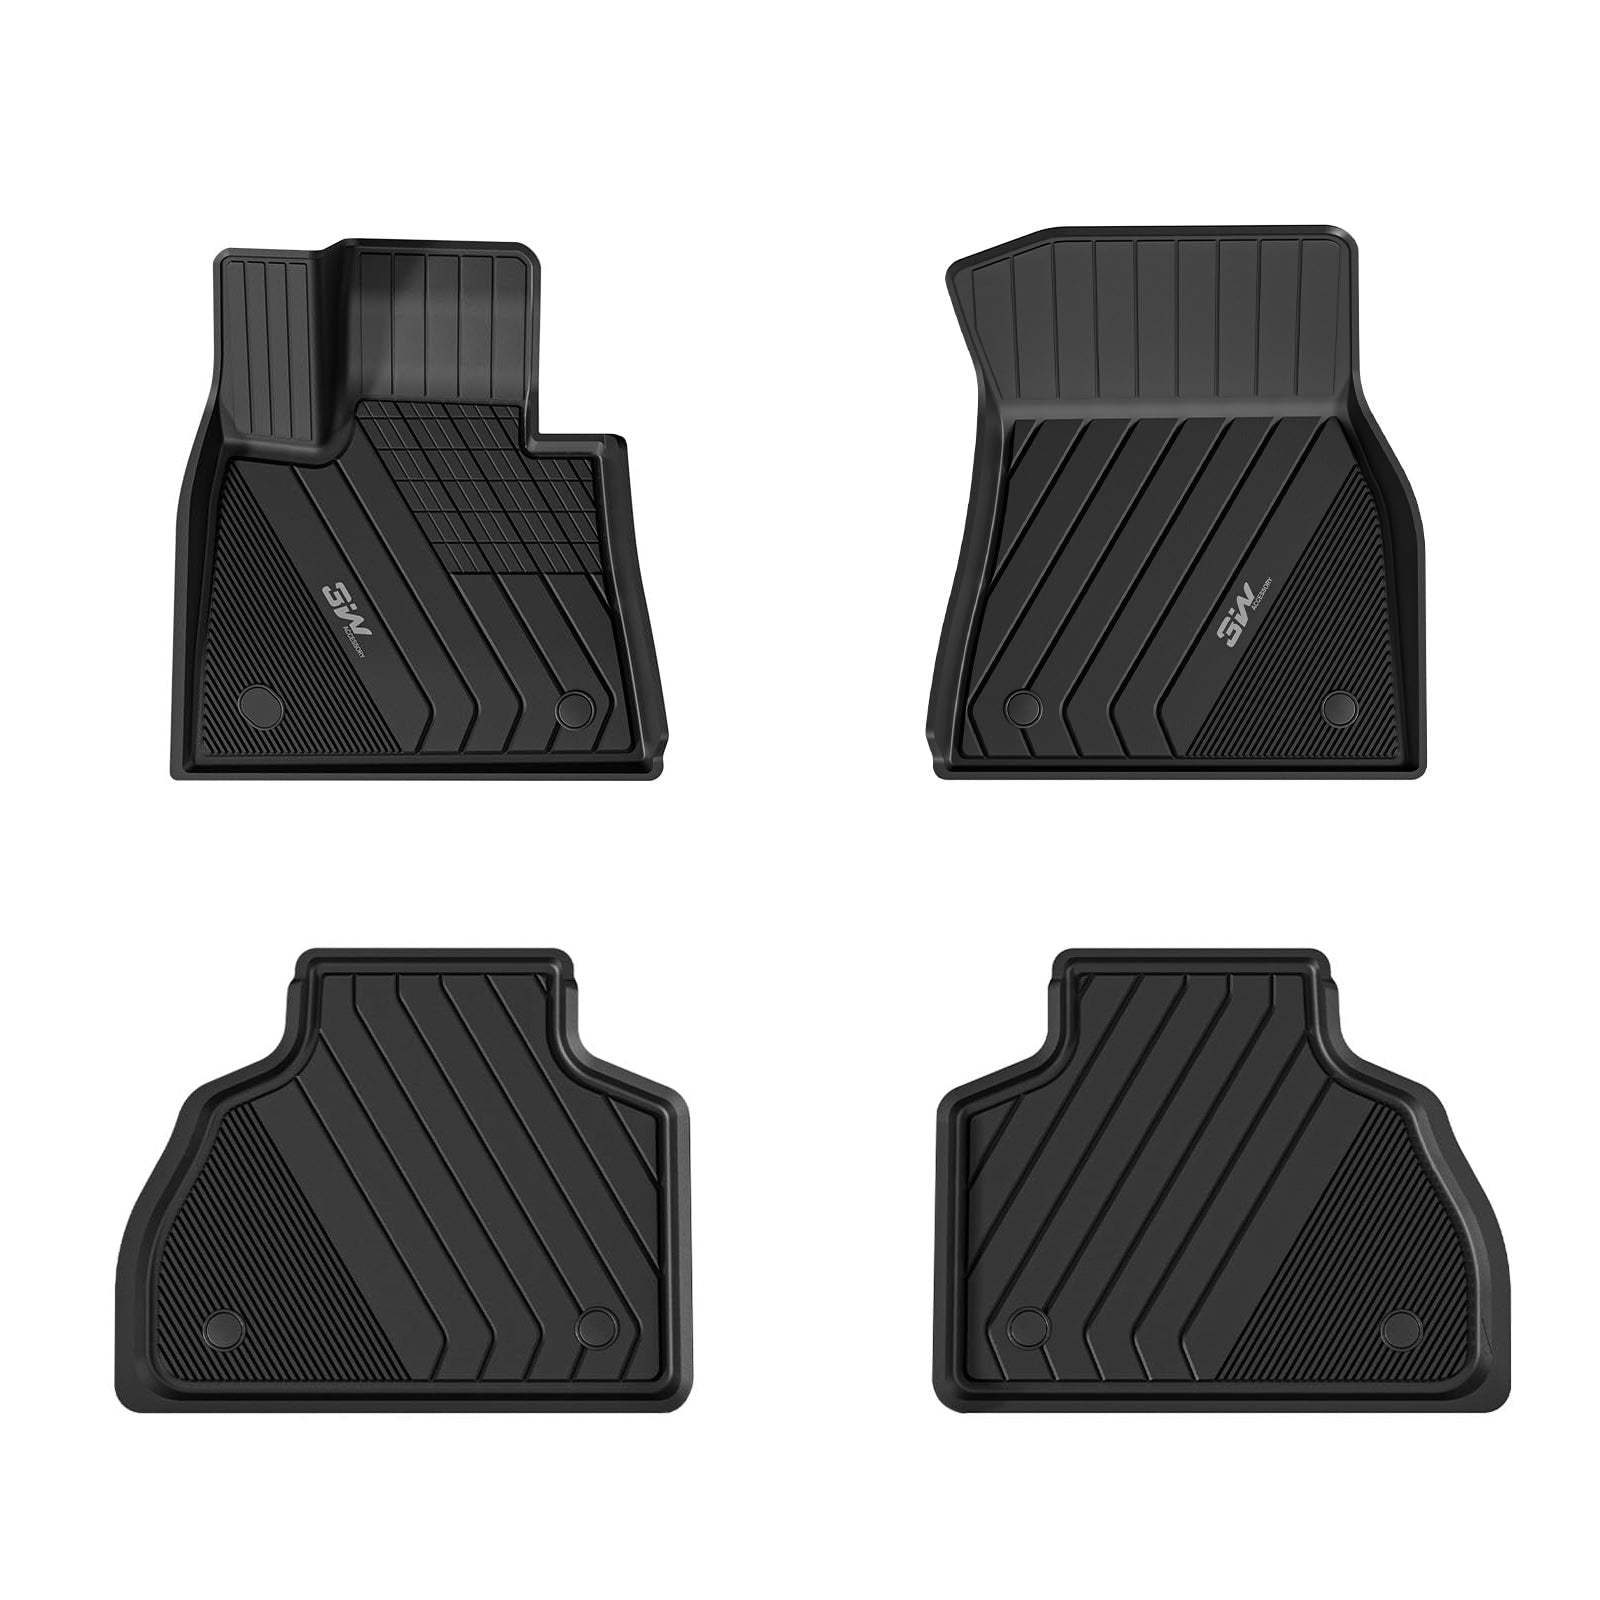 3W BMW X7 2020-2023 6 Seats Custom Floor Mats TPE Material & All-Weather Protection Vehicles & Parts 3Wliners 2020-2023 X7 2020-2023 6 Seats 1st&2nd Row Mats